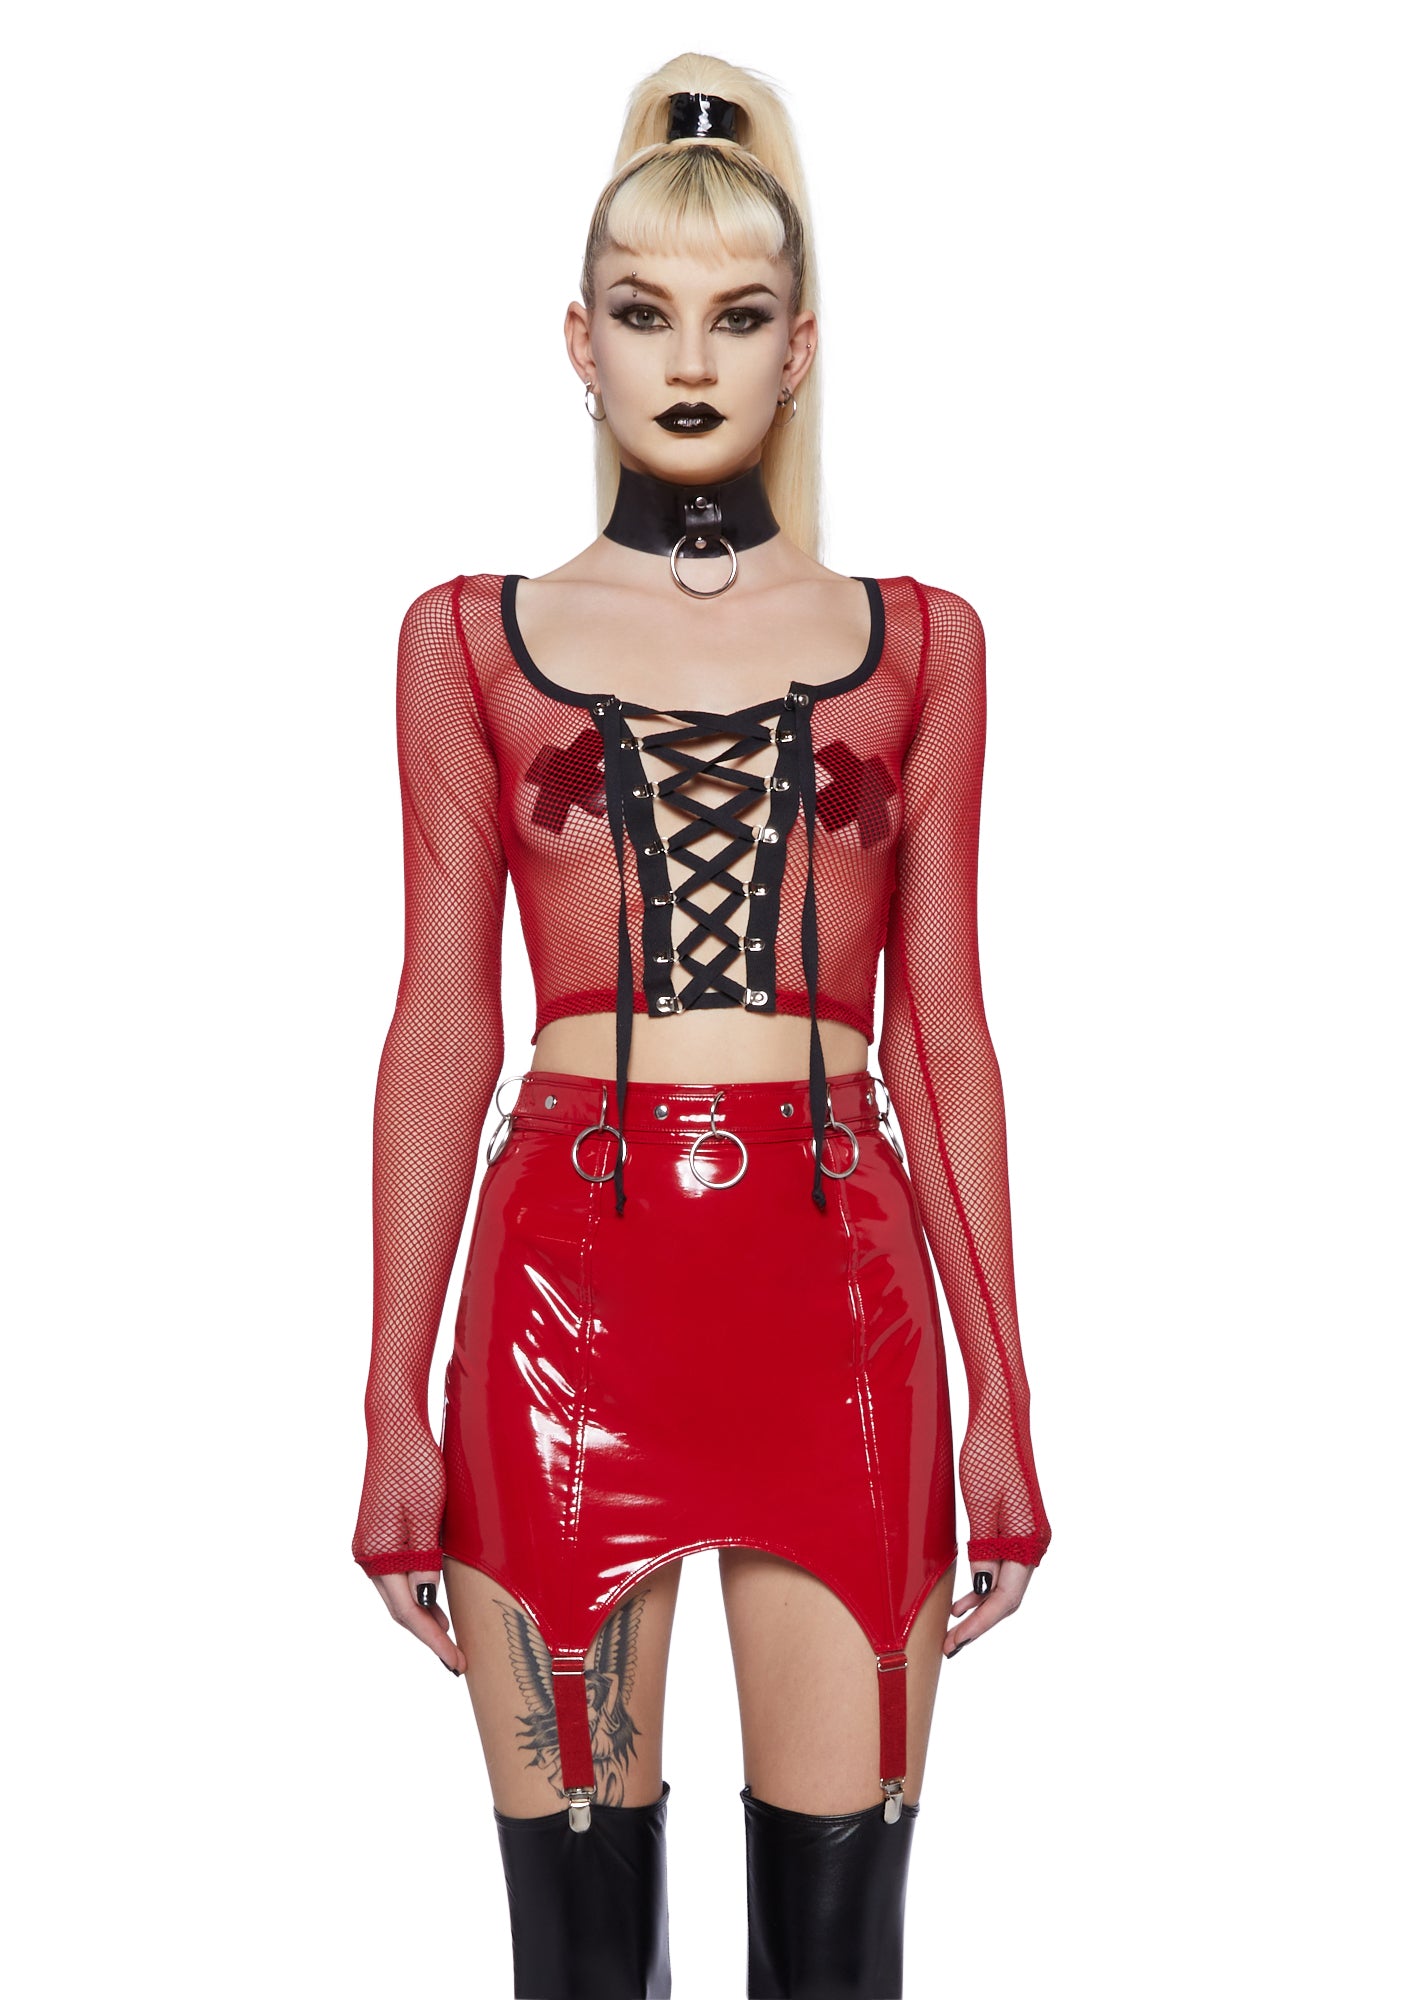 Widow Fishnet Lace Up Long Sleeve Top - Red